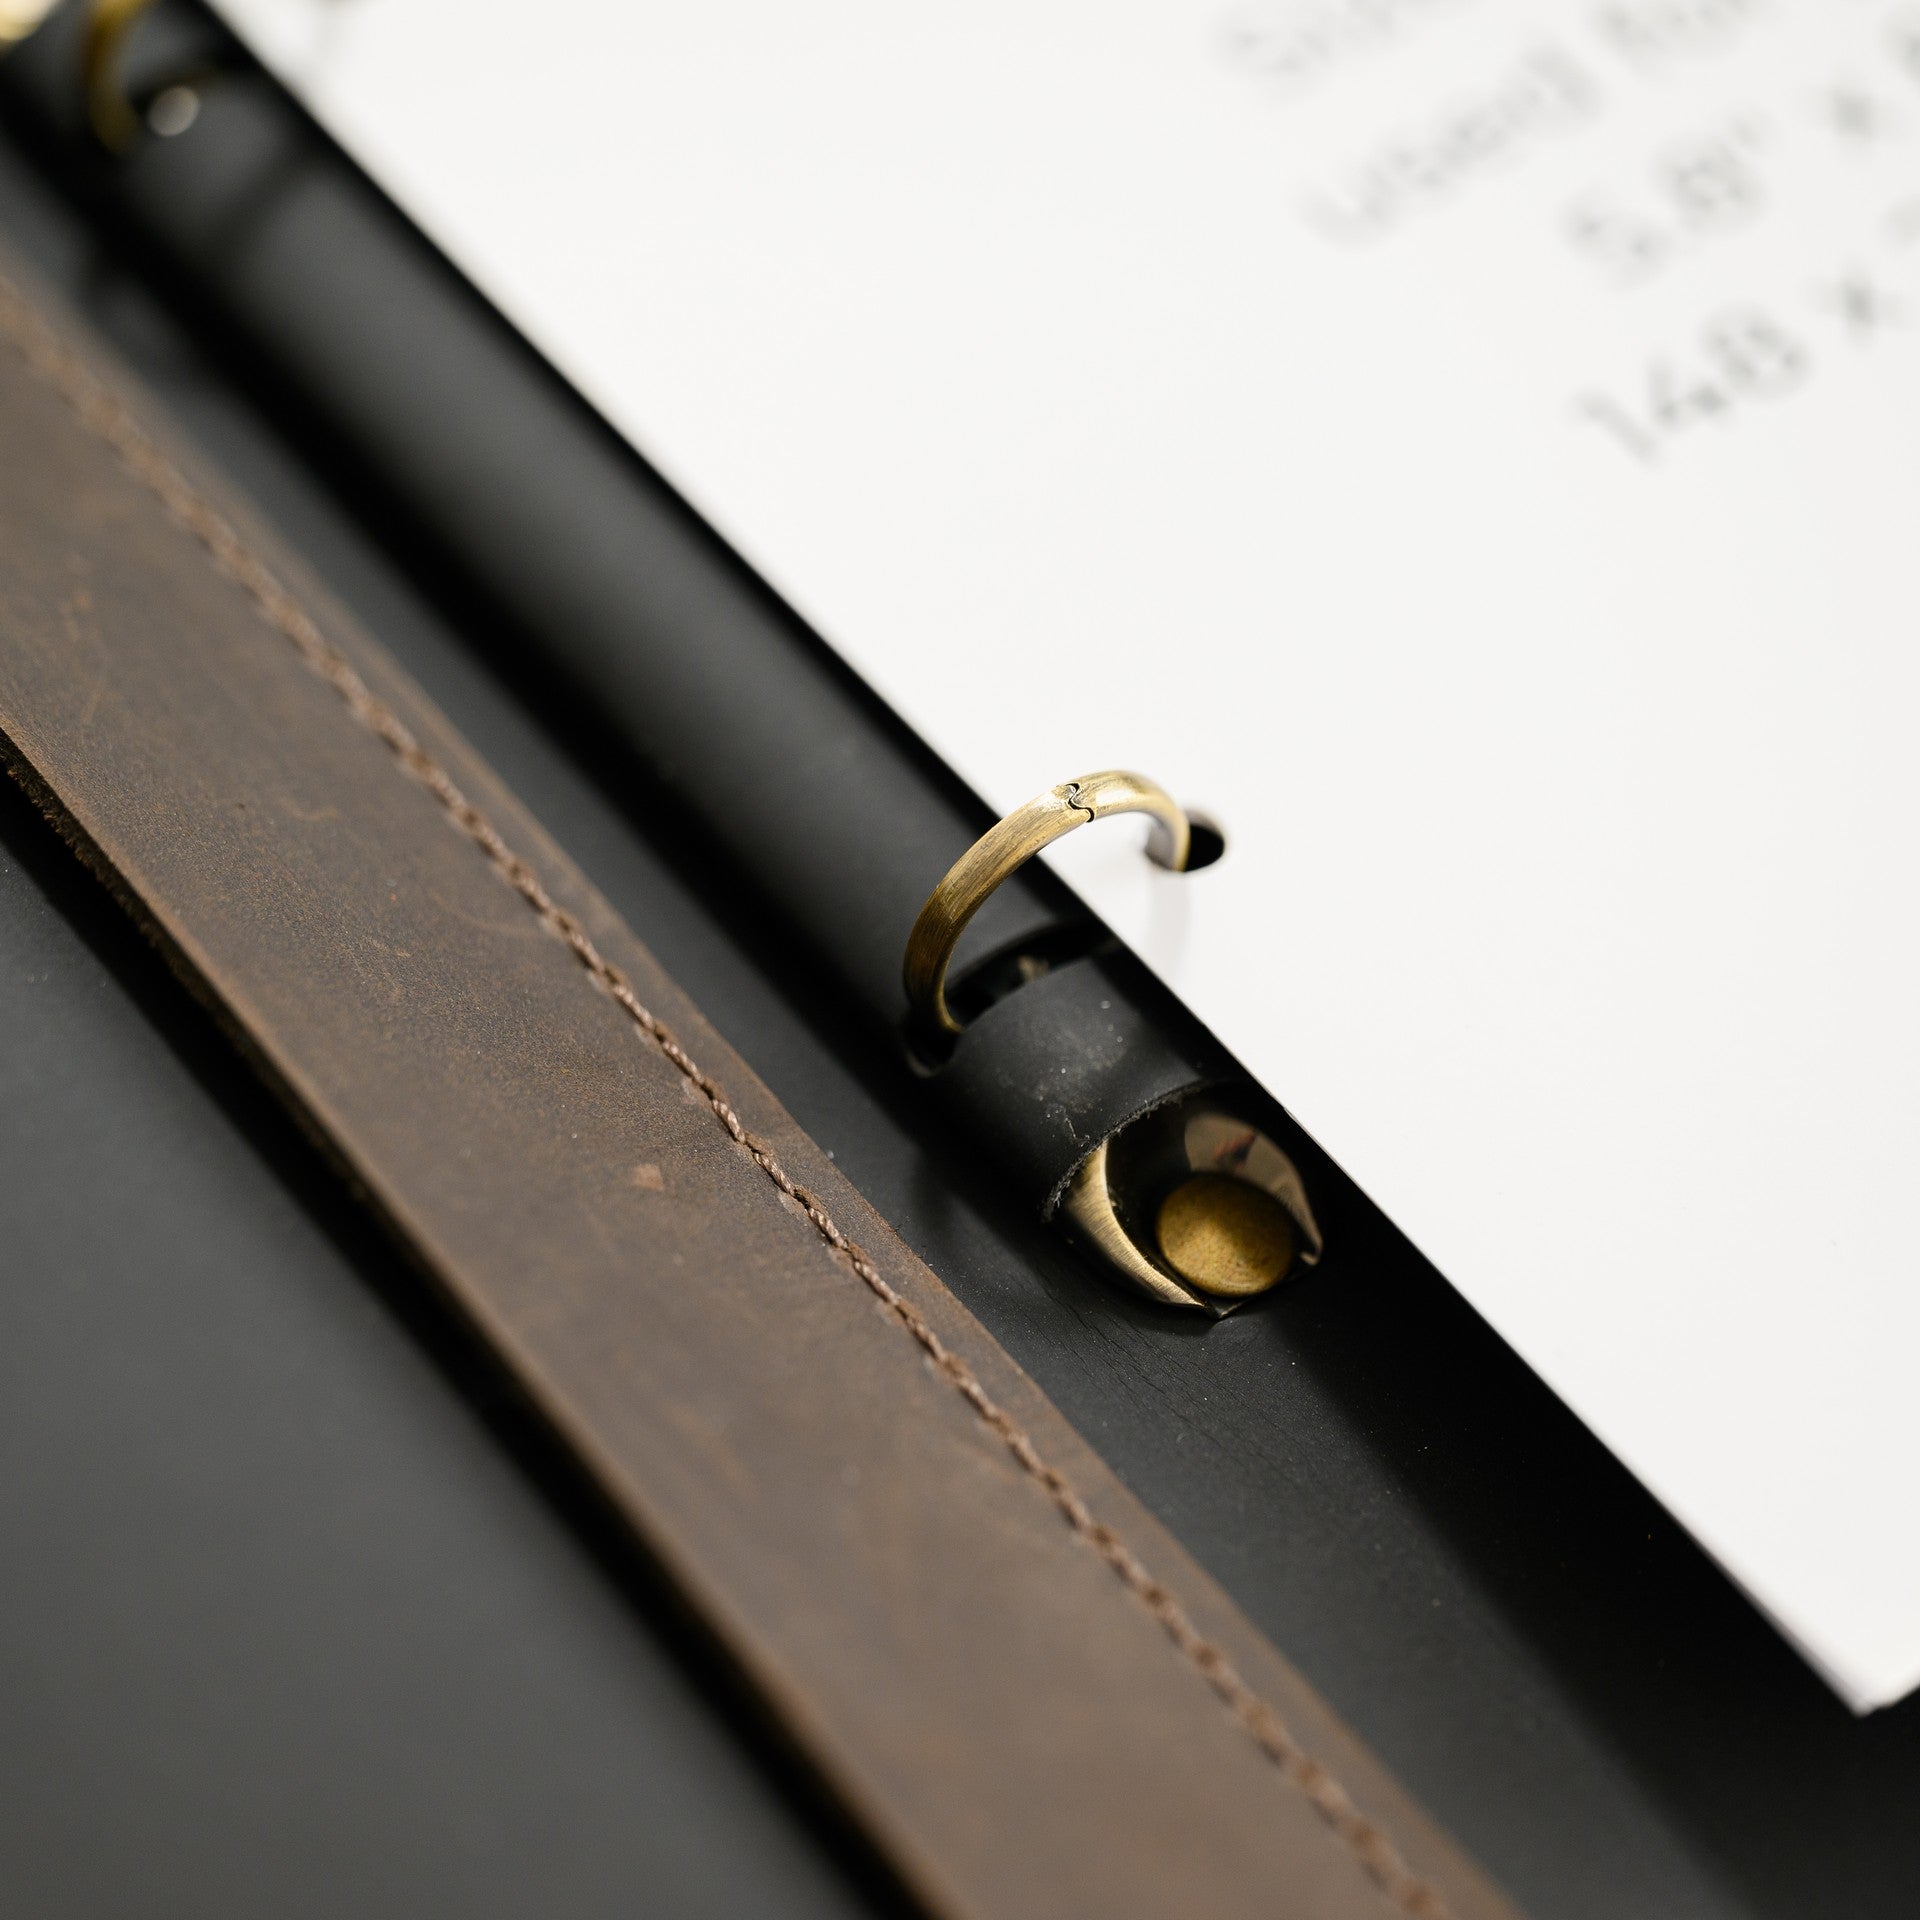 Showcase your menus with sophistication using our leather clipboard, designed for discerning tastes.